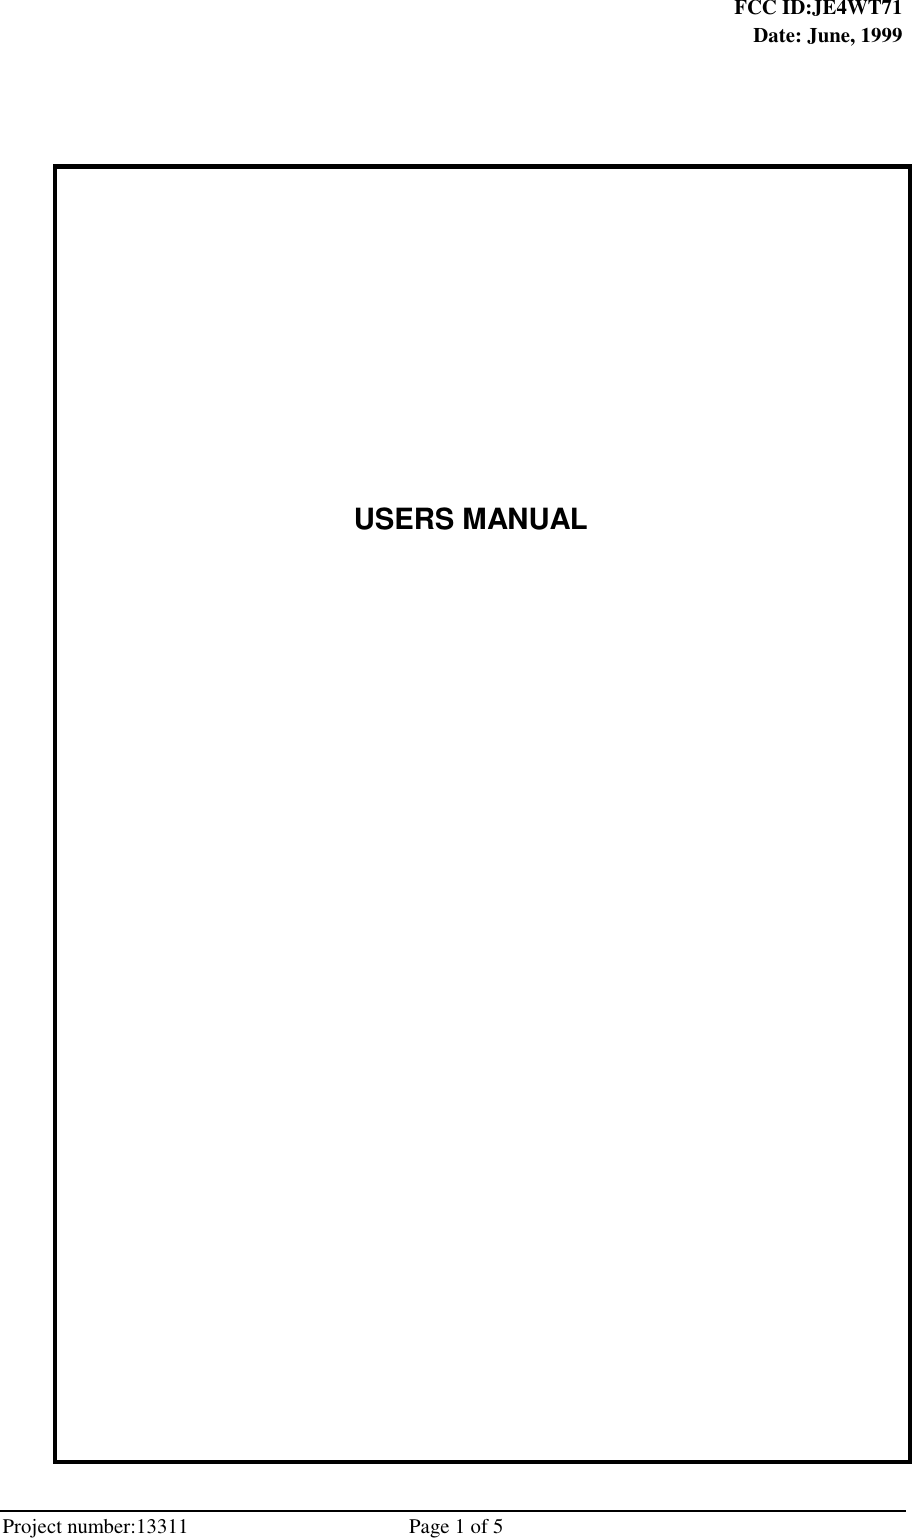  FCC ID:JE4WT71Date: June, 1999Project number:13311                                          Page 1 of 5USERS MANUAL